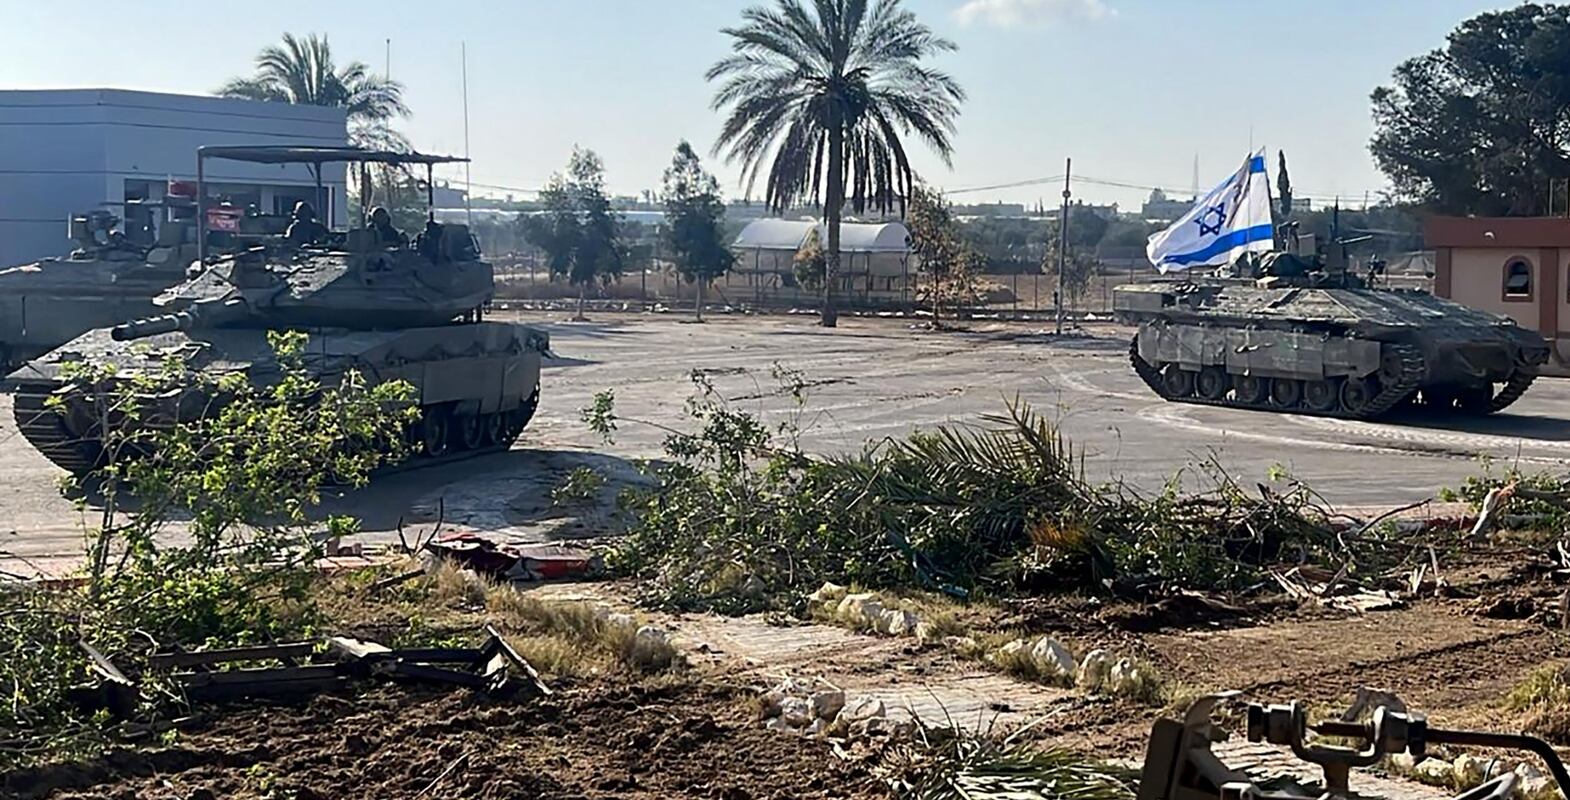 TOPSHOT - This handout picture released by the Israeli army shows the 401st Brigade's combat team tanks entering the Palestinian side of the Rafah border crossing between Gaza and Egypt in the southern Gaza Strip on May 7, 2024.  The Israeli army said it took "operational control" of the Palestinian side of the Rafah border crossing on May 7 and that troops were scanning the area.  (Photo by Israeli Army  /  AFP)  /  === RESTRICTED TO EDITORIAL USE - MANDATORY CREDIT "AFP PHOTO  /  Handout  /  Israeli Army' - NO MARKETING NO ADVERTISING CAMPAIGNS - DISTRIBUTED AS A SERVICE TO CLIENTS ==